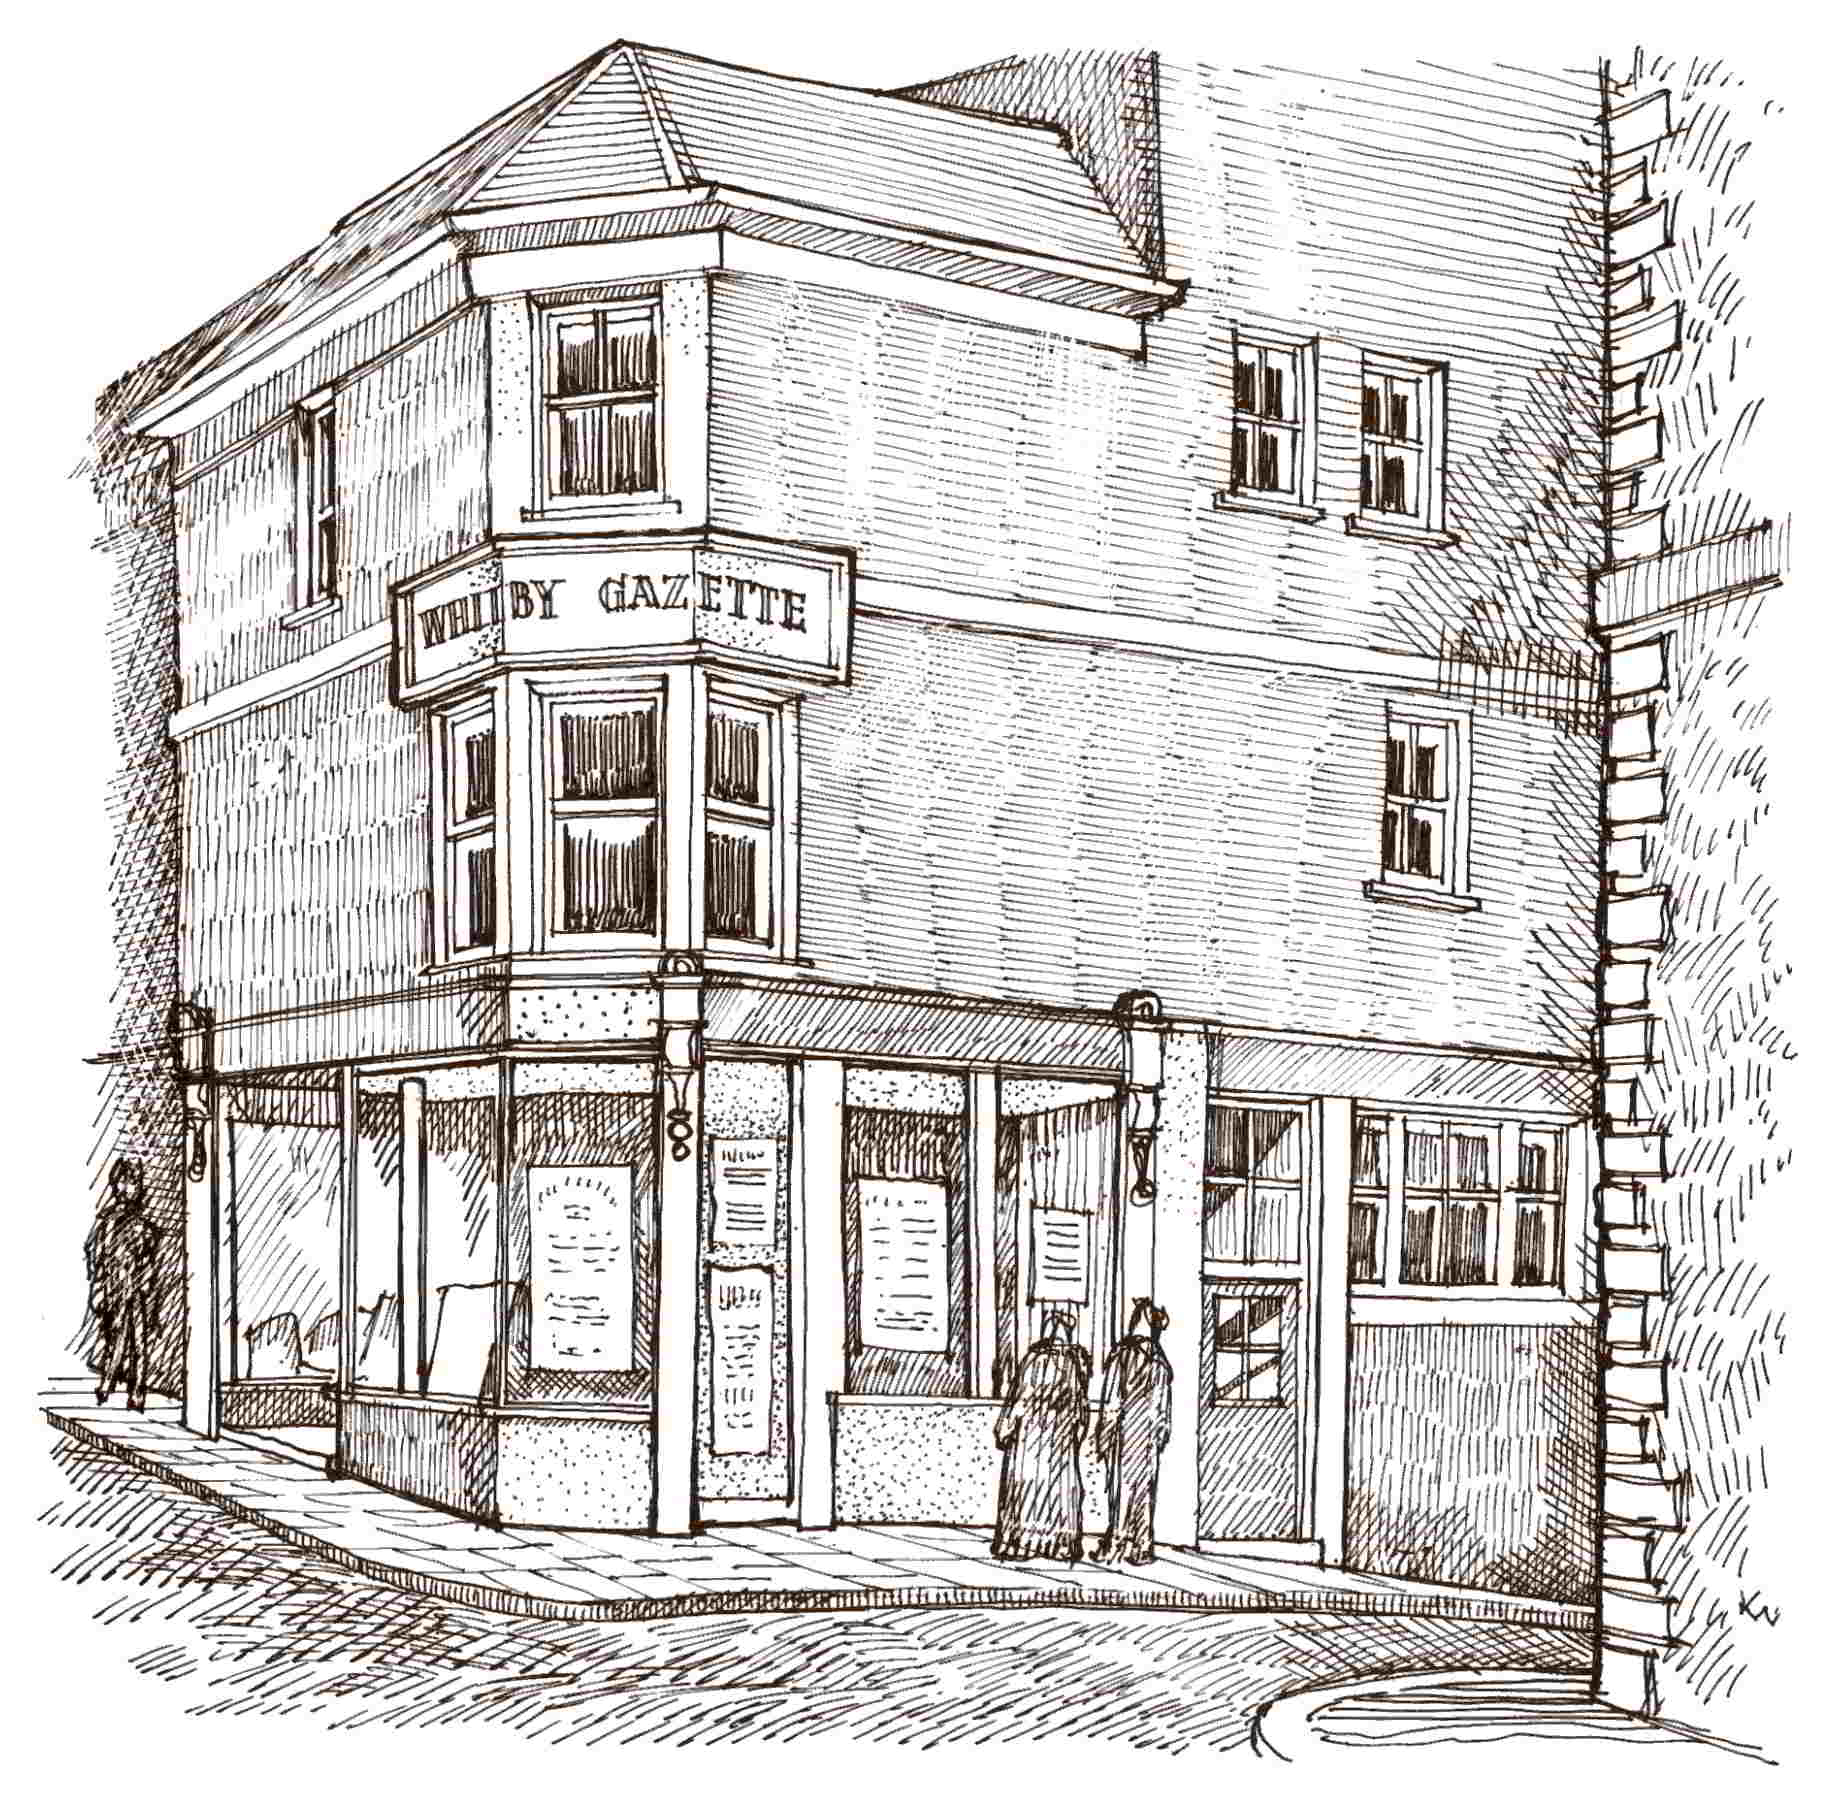 Whitby Gazette Offices